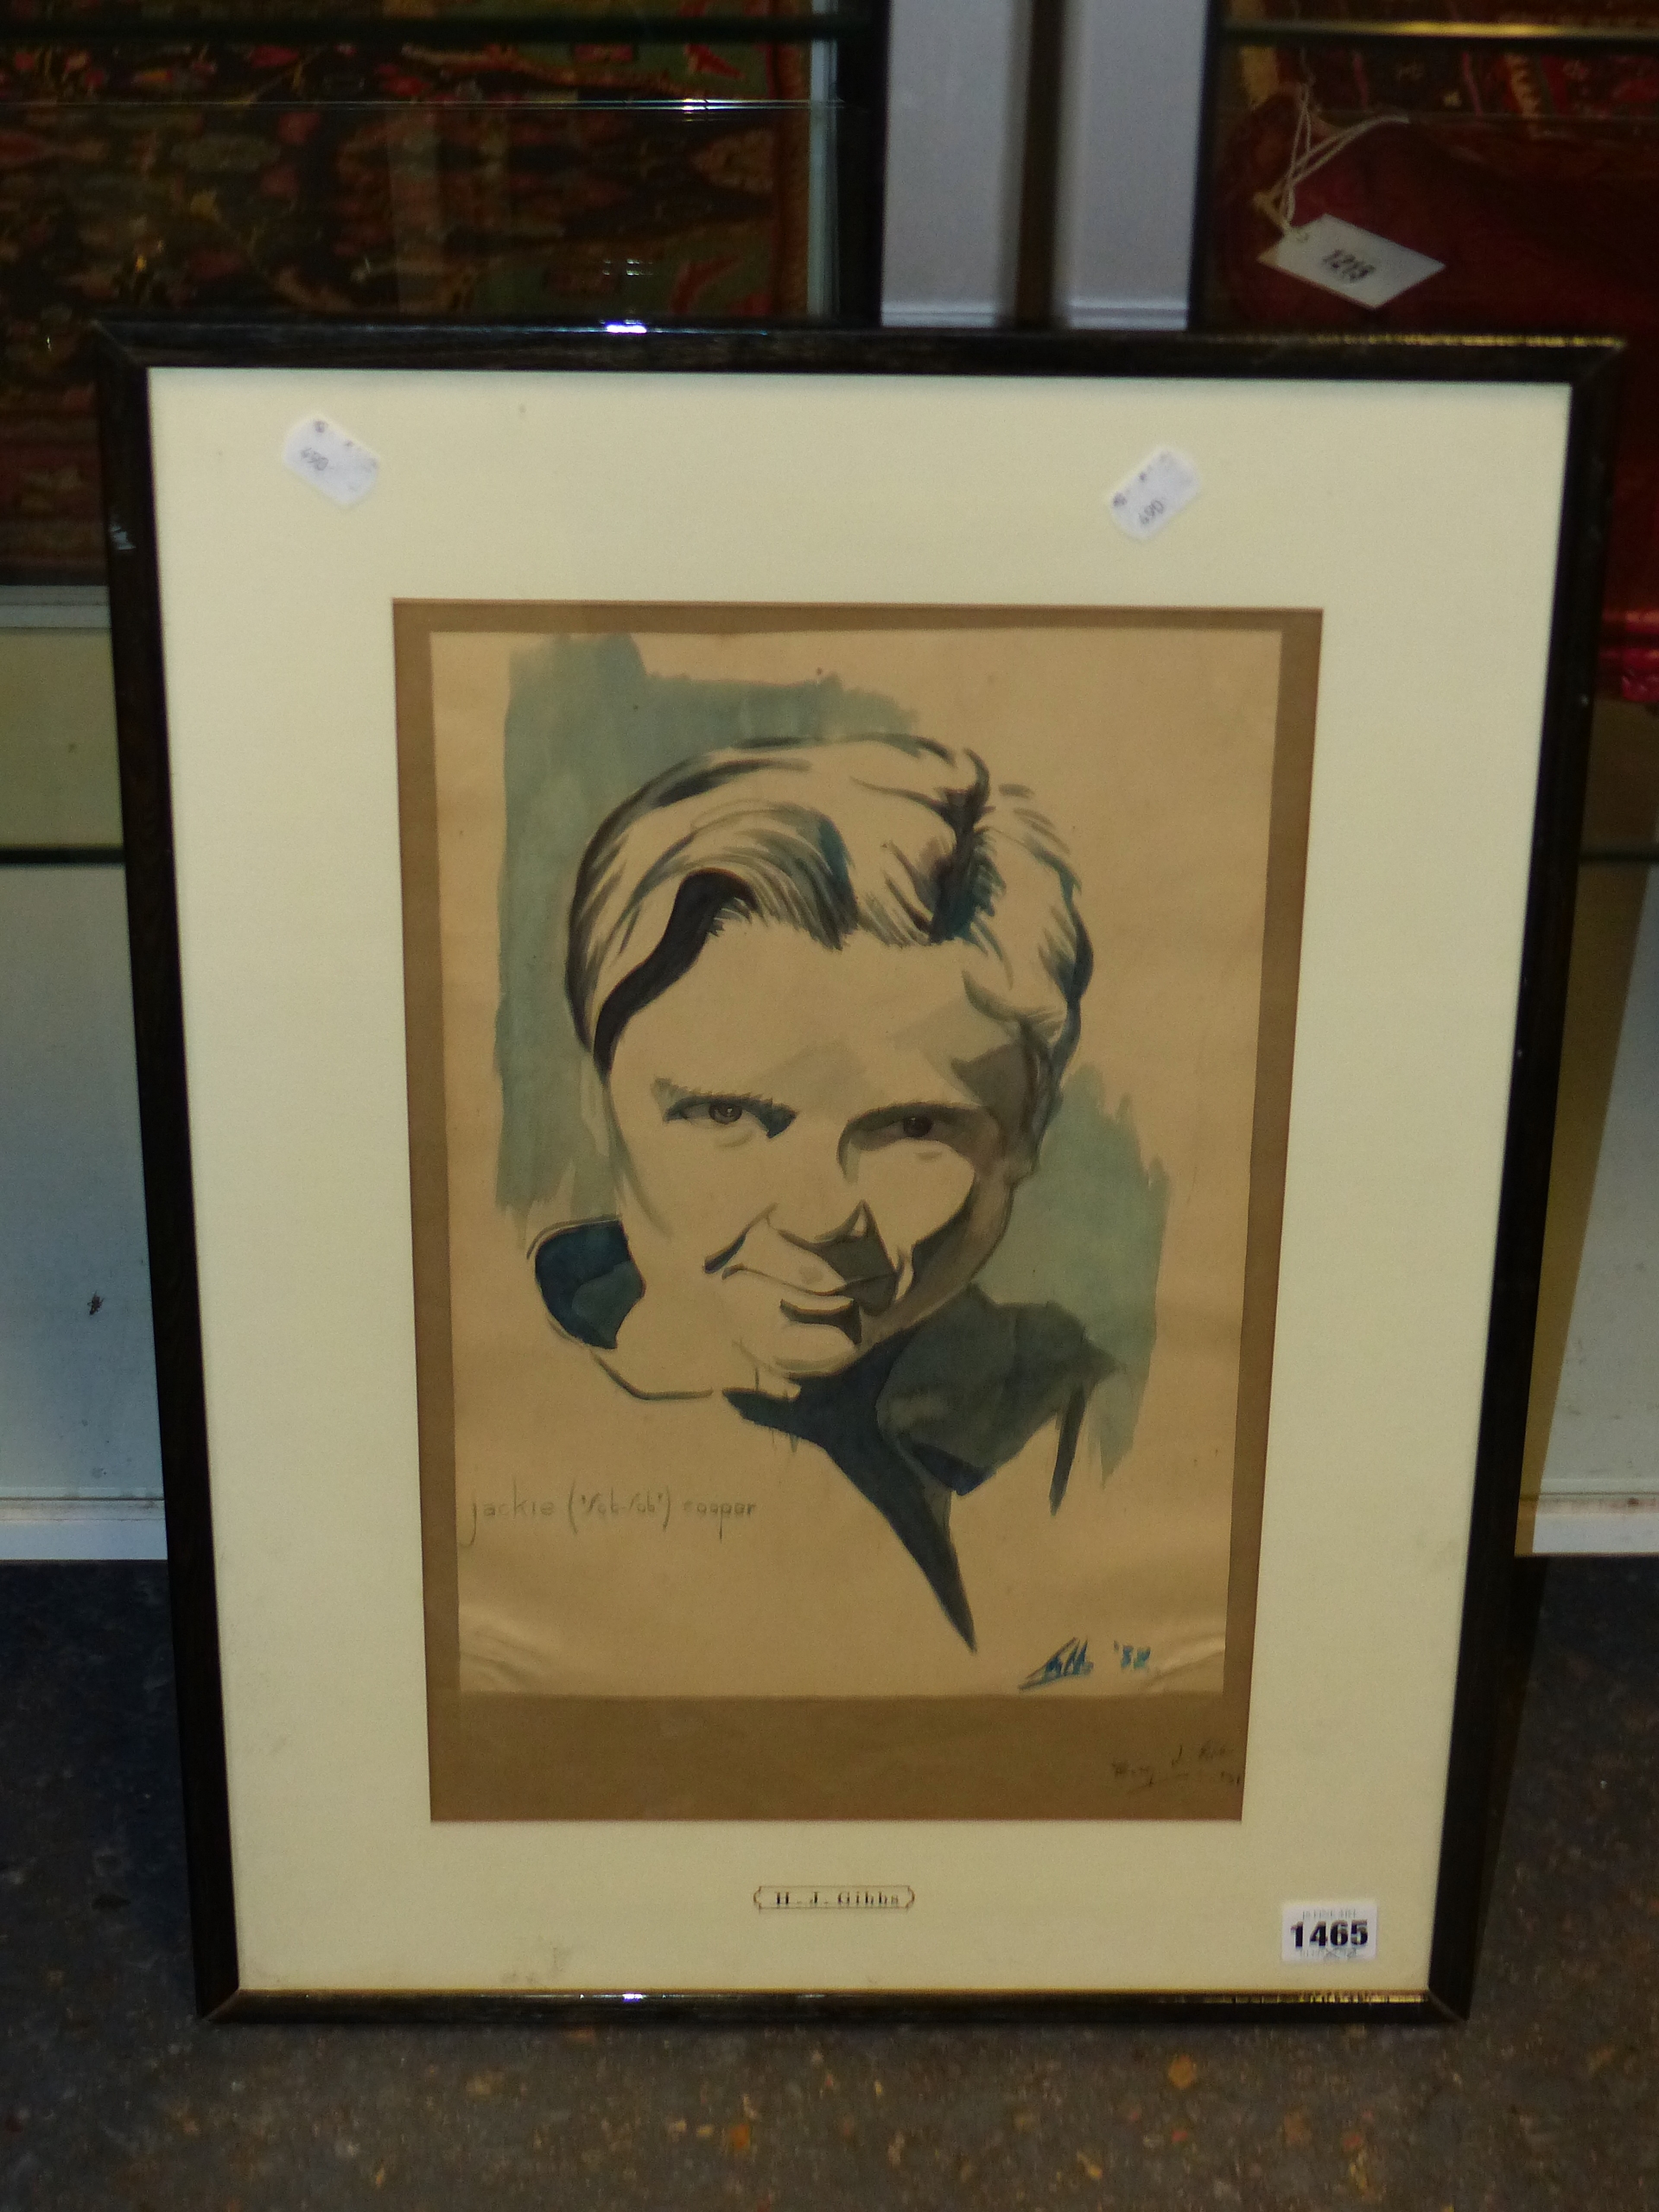 H.J GIBBS (EARLY 20th C. ENGLISH SCHOOL) PORTRAIT OF JACKIE COOPER. SIGNED WATERCOLOUR 36 x 24cms, - Image 4 of 8